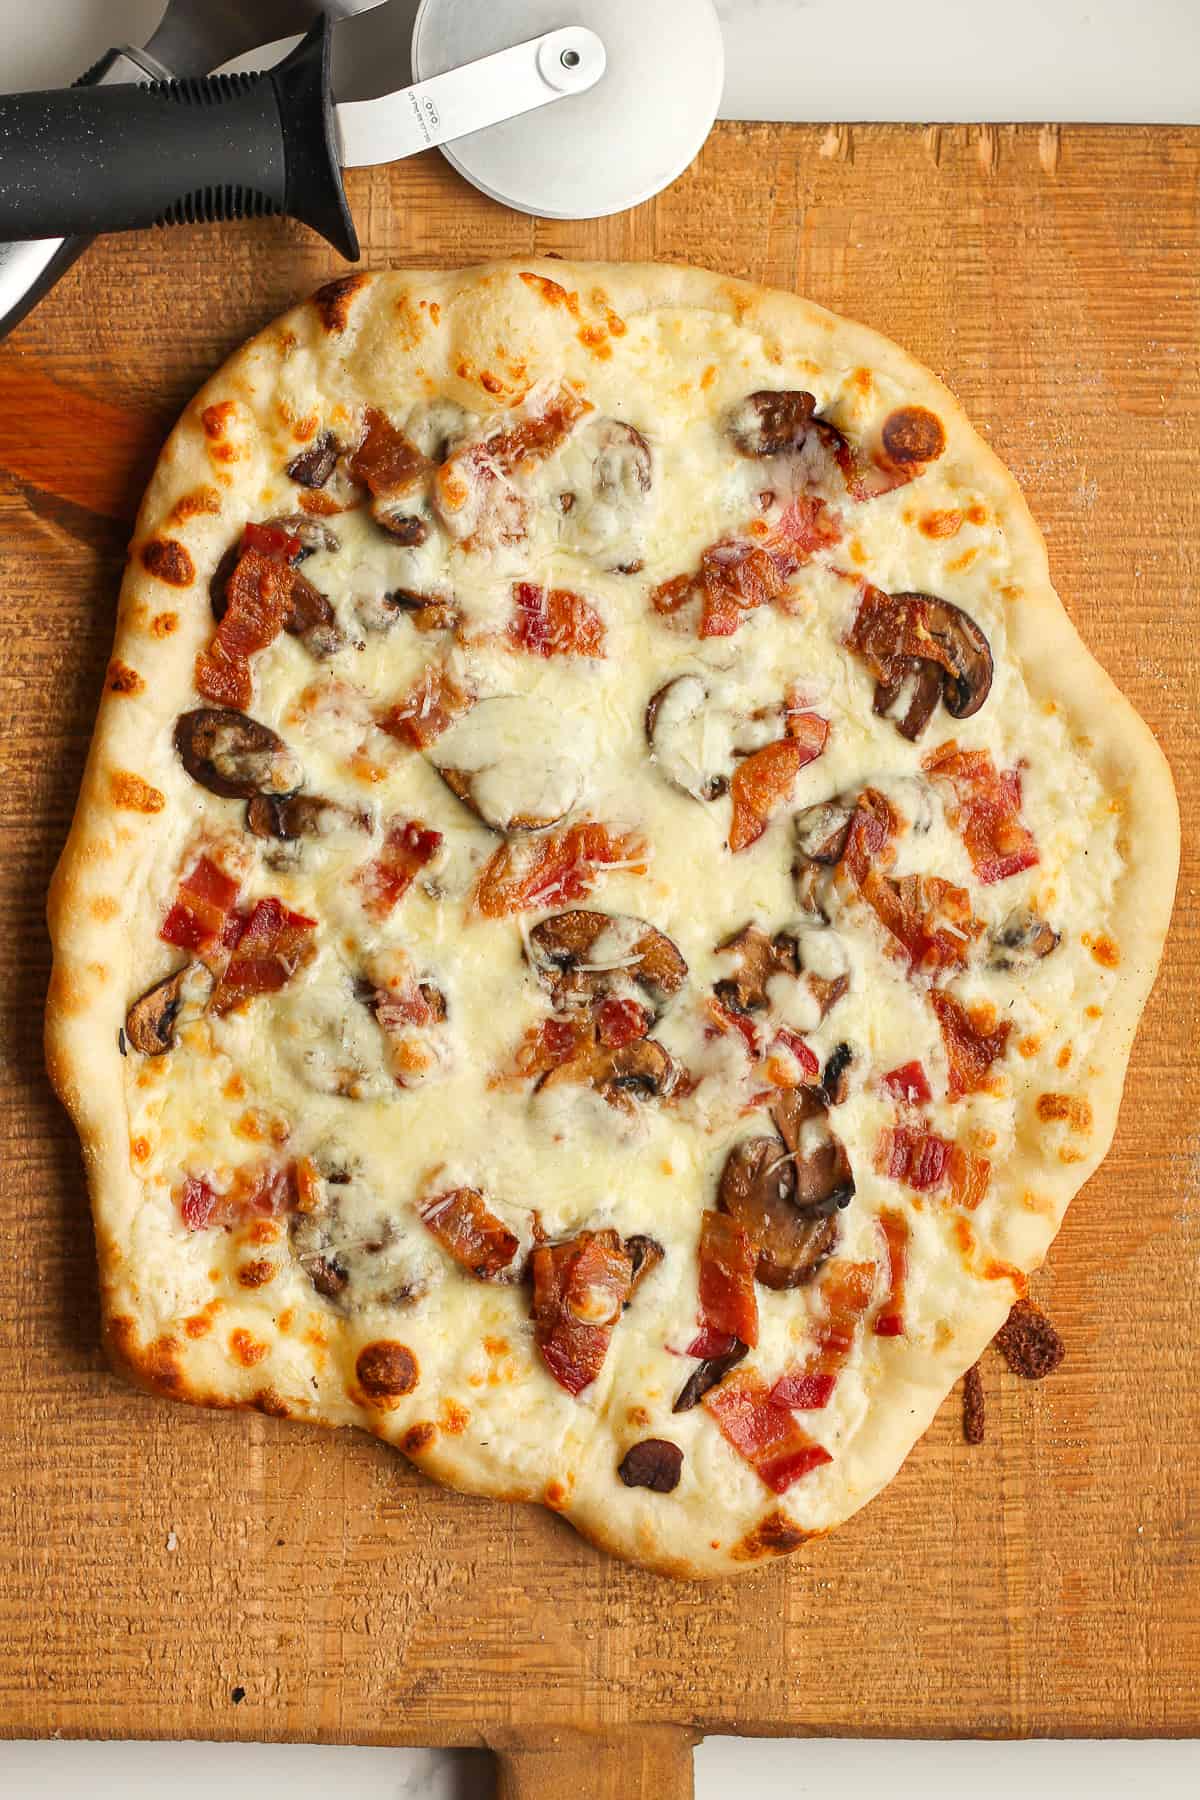 A grilled white sauce pizza on a wooden board.